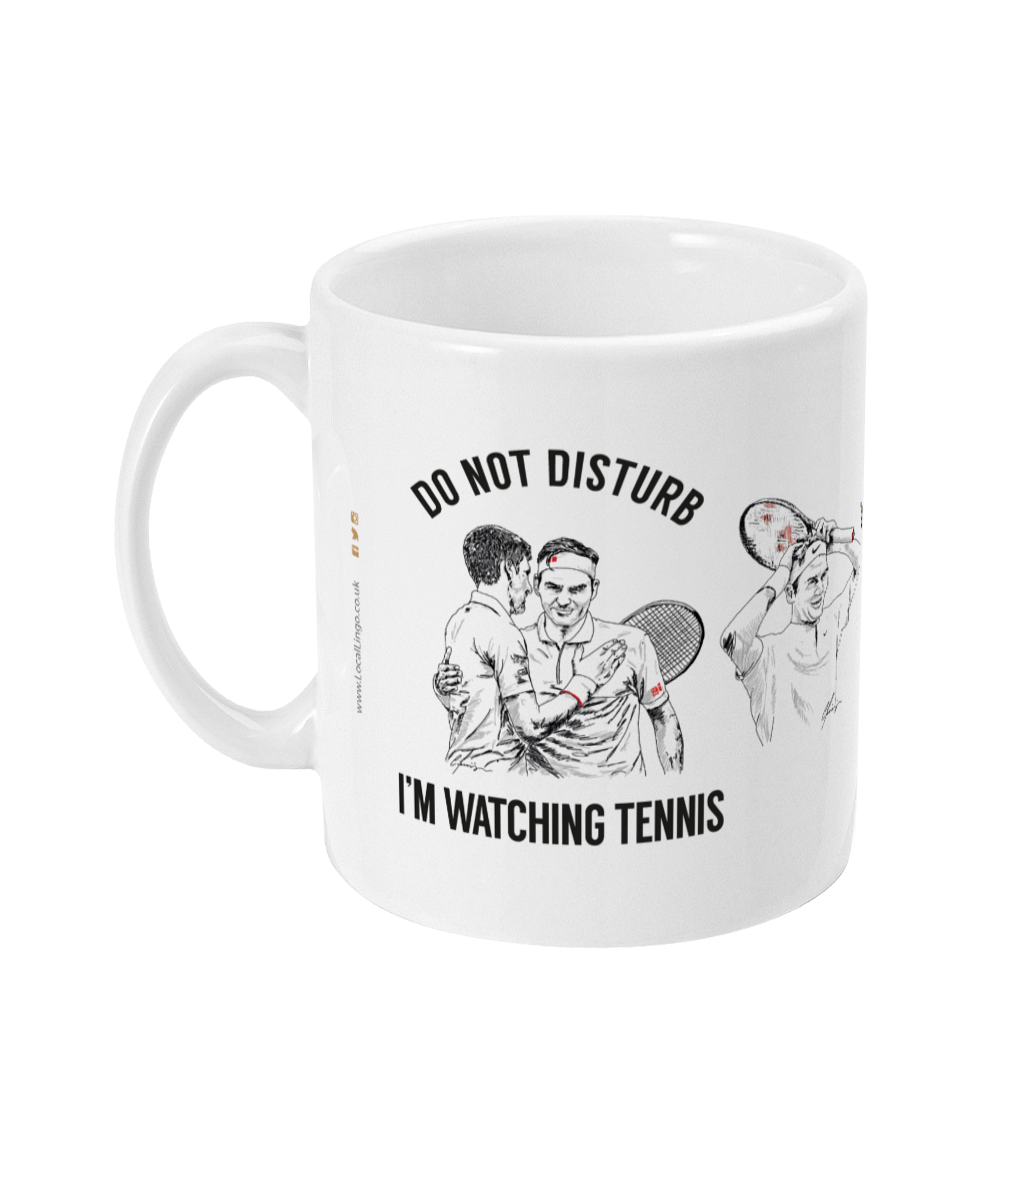 Front Left View of 'Do Not Disturb, I'm Watching Tennis' Mug with Andy Murray, Djokovic, Federer & Nadal Illustrations designed by local lingo